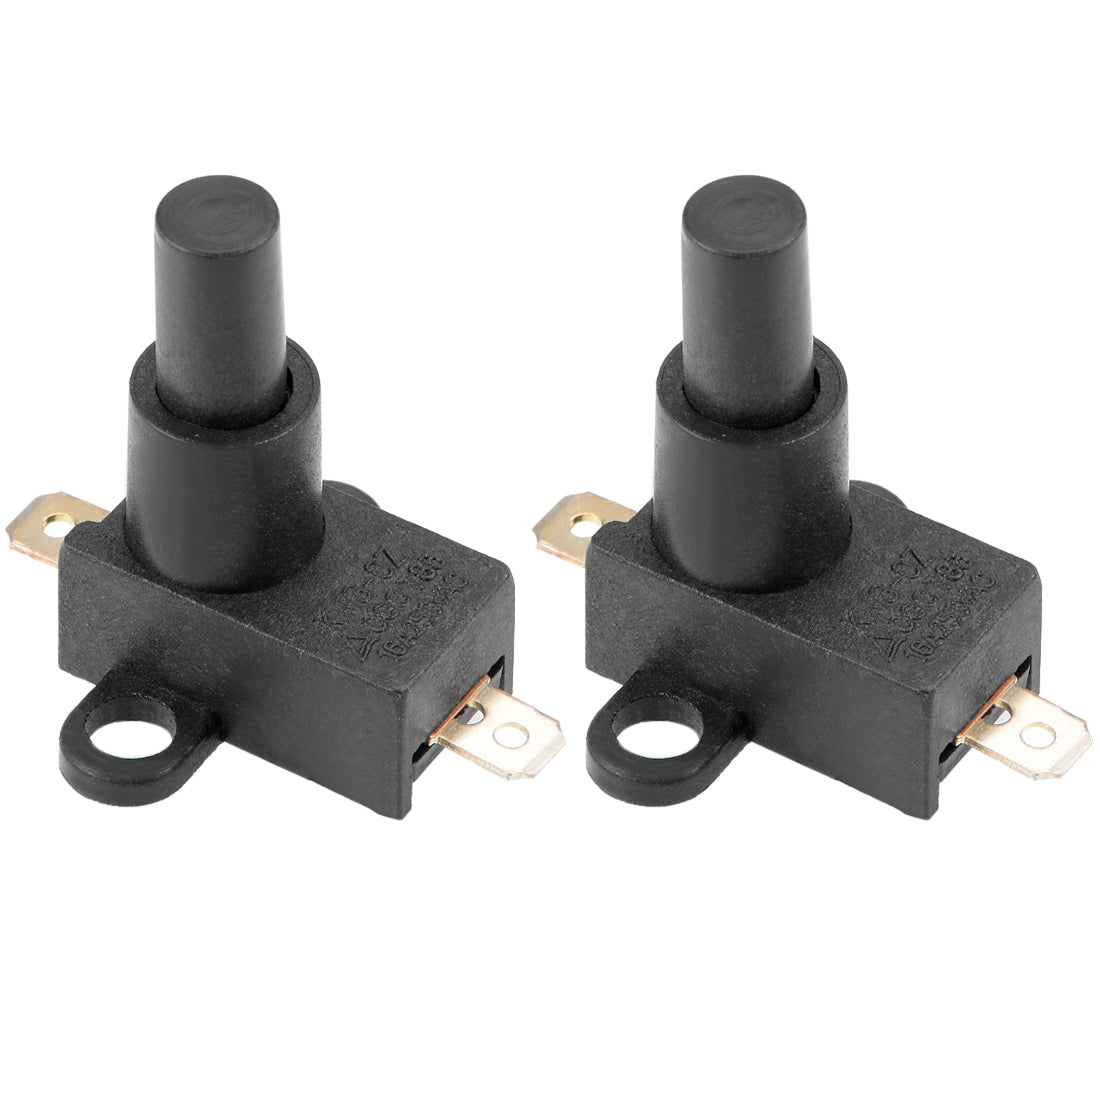 uxcell Uxcell Anti Tilt Switch AC 250V 16A 16mm Push Button for Patio Garden Heaters Electric Fan 2pcs